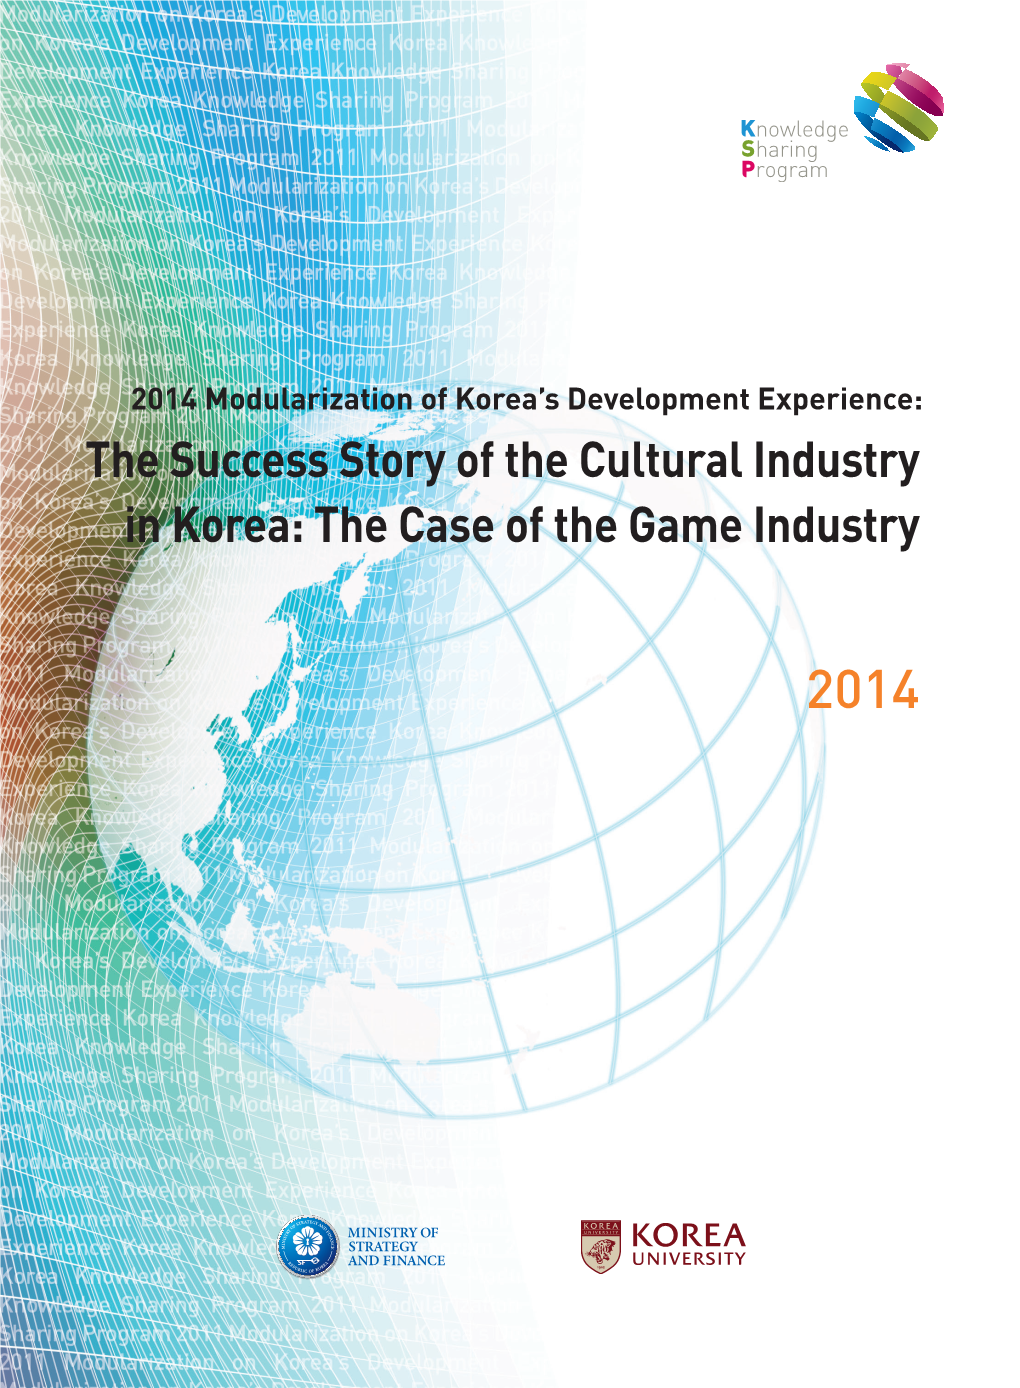 The Success Story of the Cultural Industry in Korea: the Case of the Game Industry